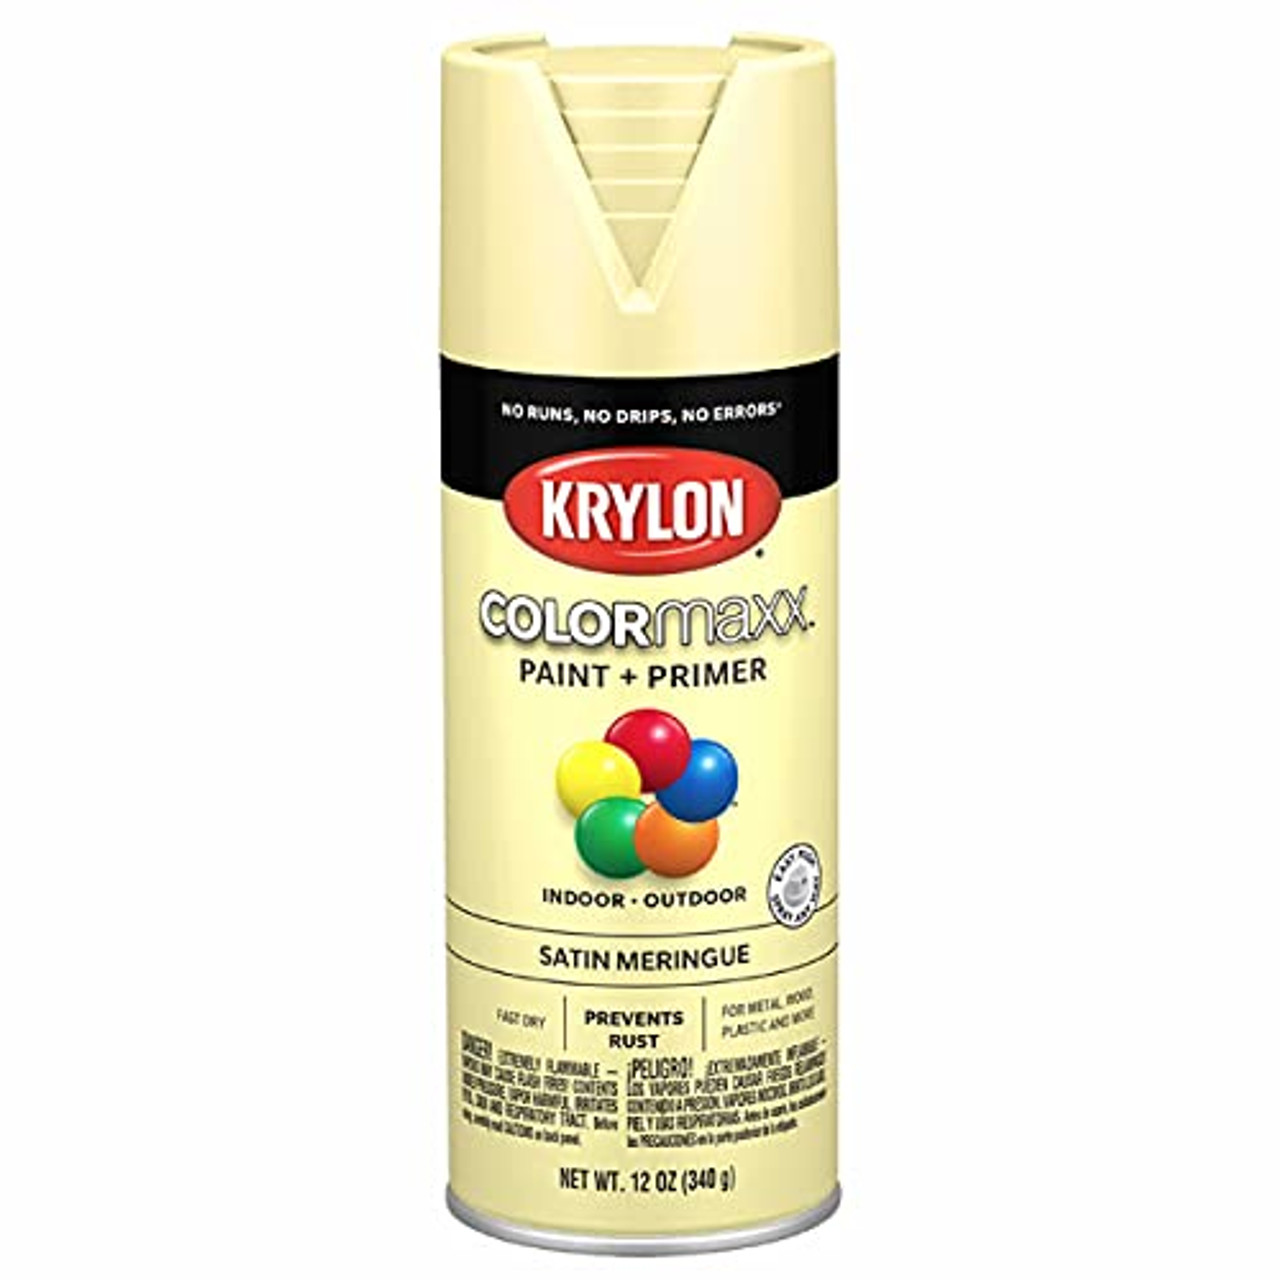 Colormaxx K05570007 Spray Paint and Primer for In/Outdoor Satin Meringue  Yellow